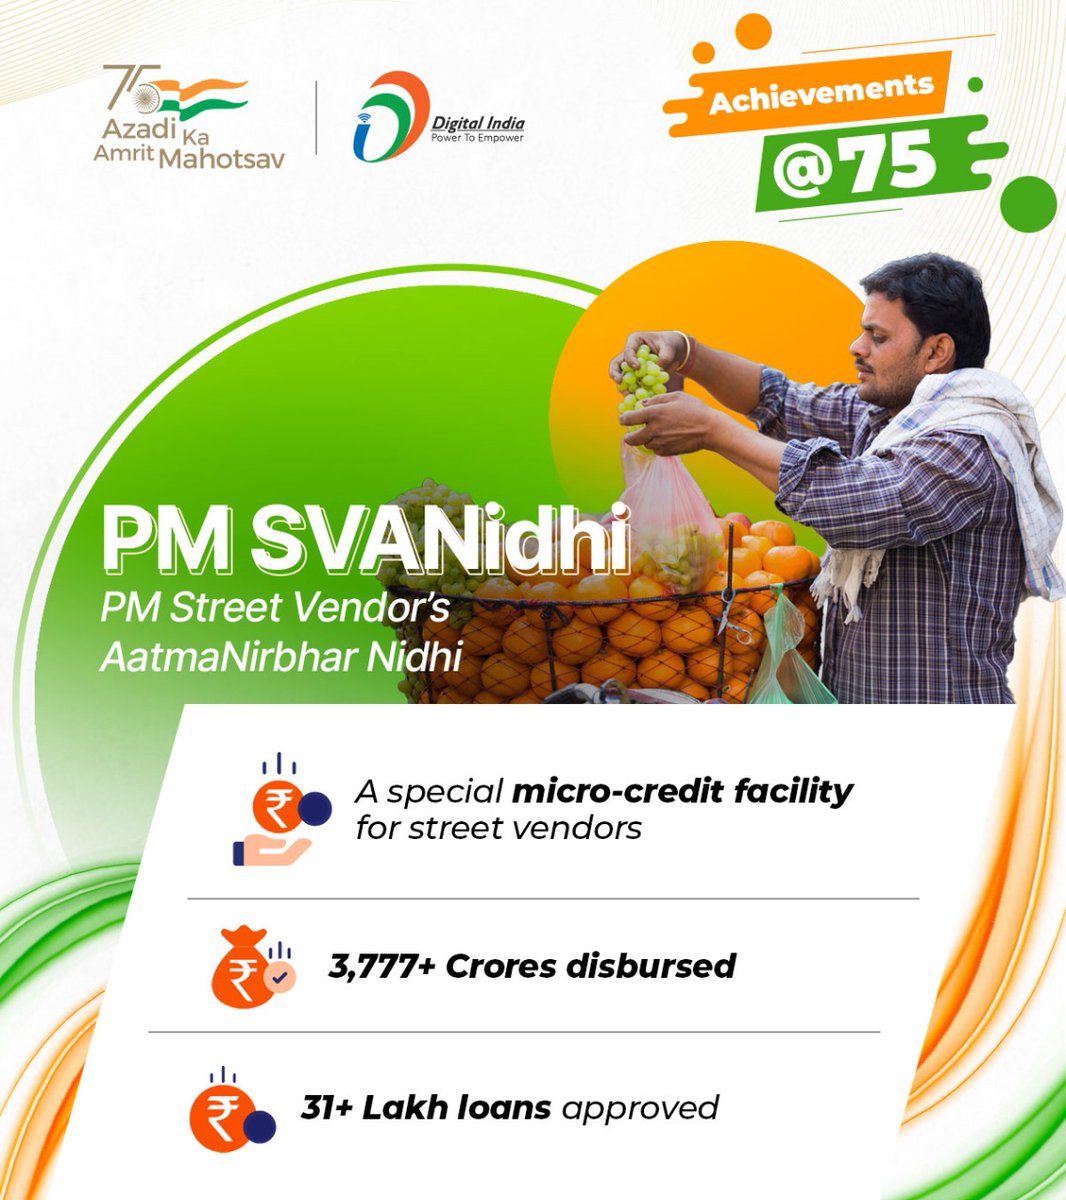 #DigitalIndia | PM SVANidhi aims to facilitate street vendors to access affordable working capital loans without any collateral security and support them in carrying out their livelihoods activities with greater ease. Know more at pmsvanidhi.mohua.gov.in #AmritMahotsav